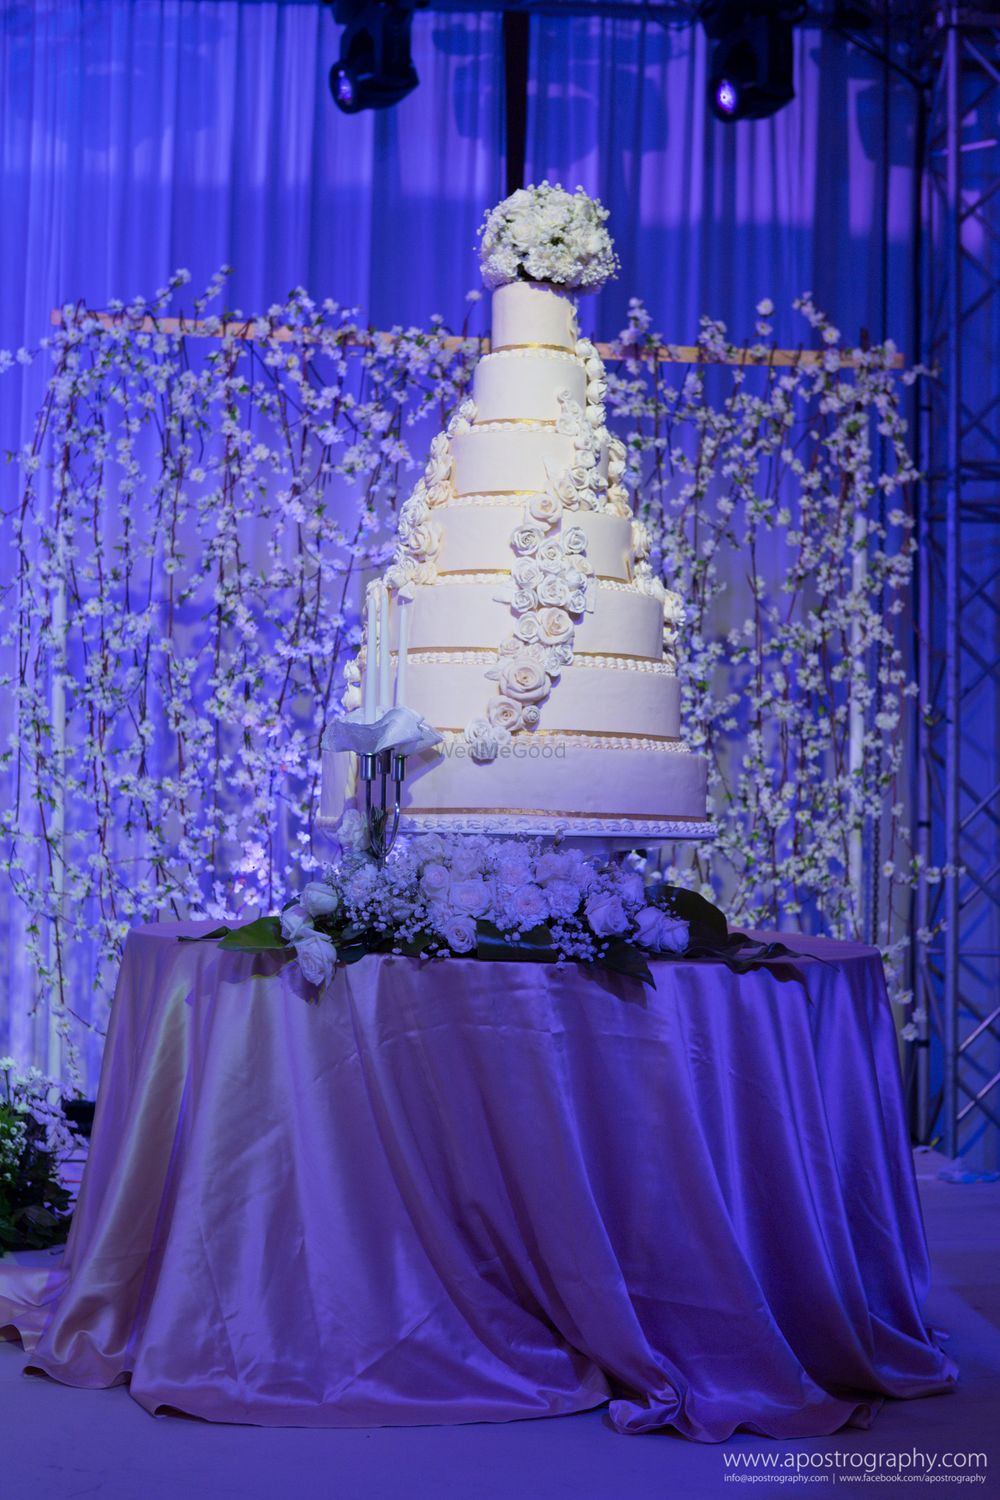 Photo of 7 Tier White Wedding Cake with Floral Cake Decor